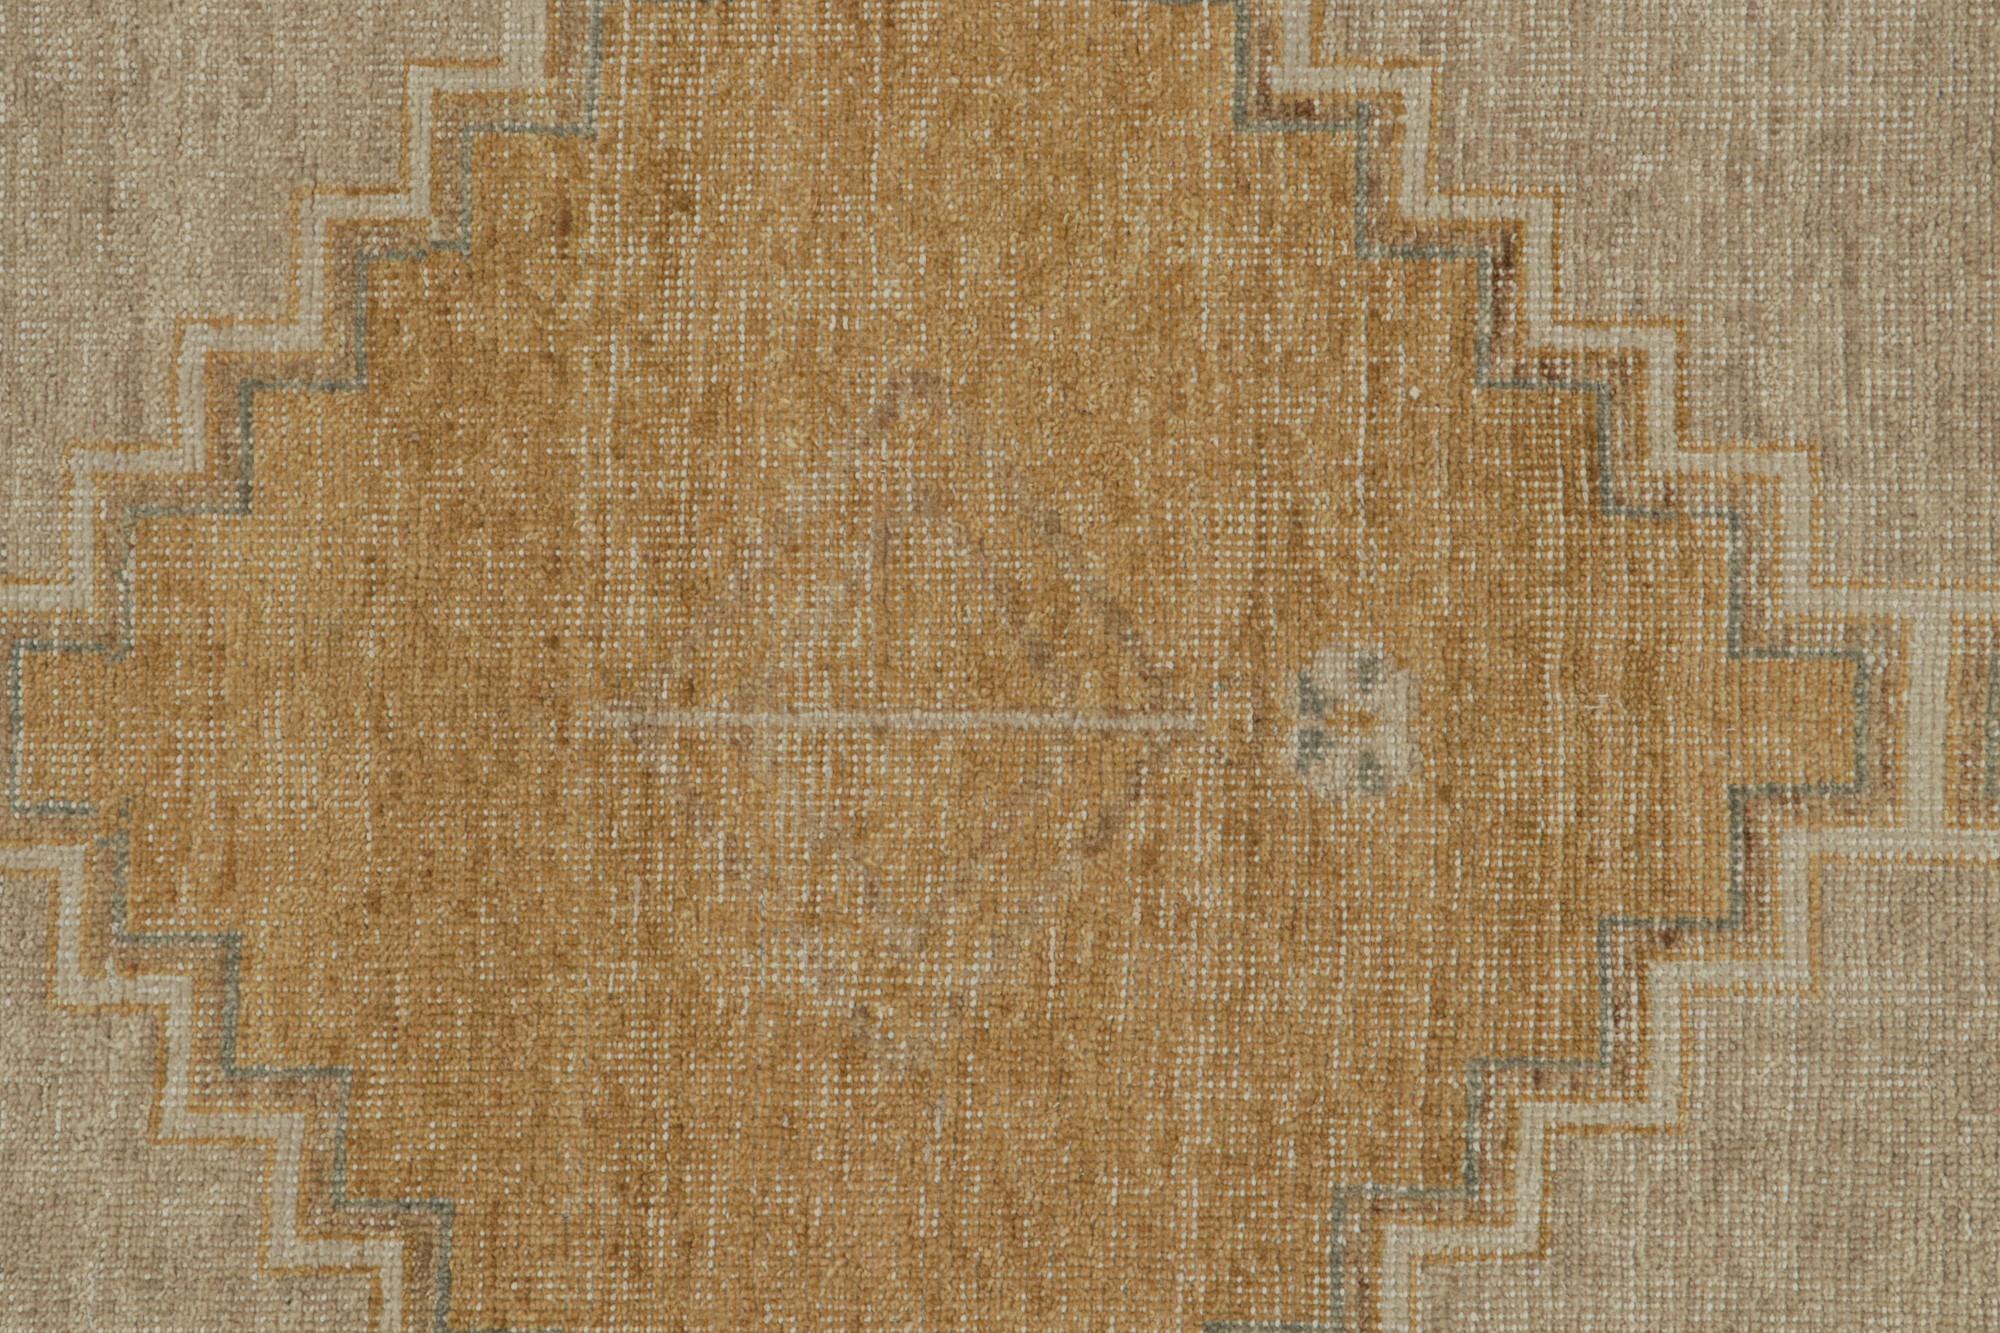 Contemporary Rug & Kilim’s Modern Rug in Beige and Gold Tones, with Geometric Patterns For Sale